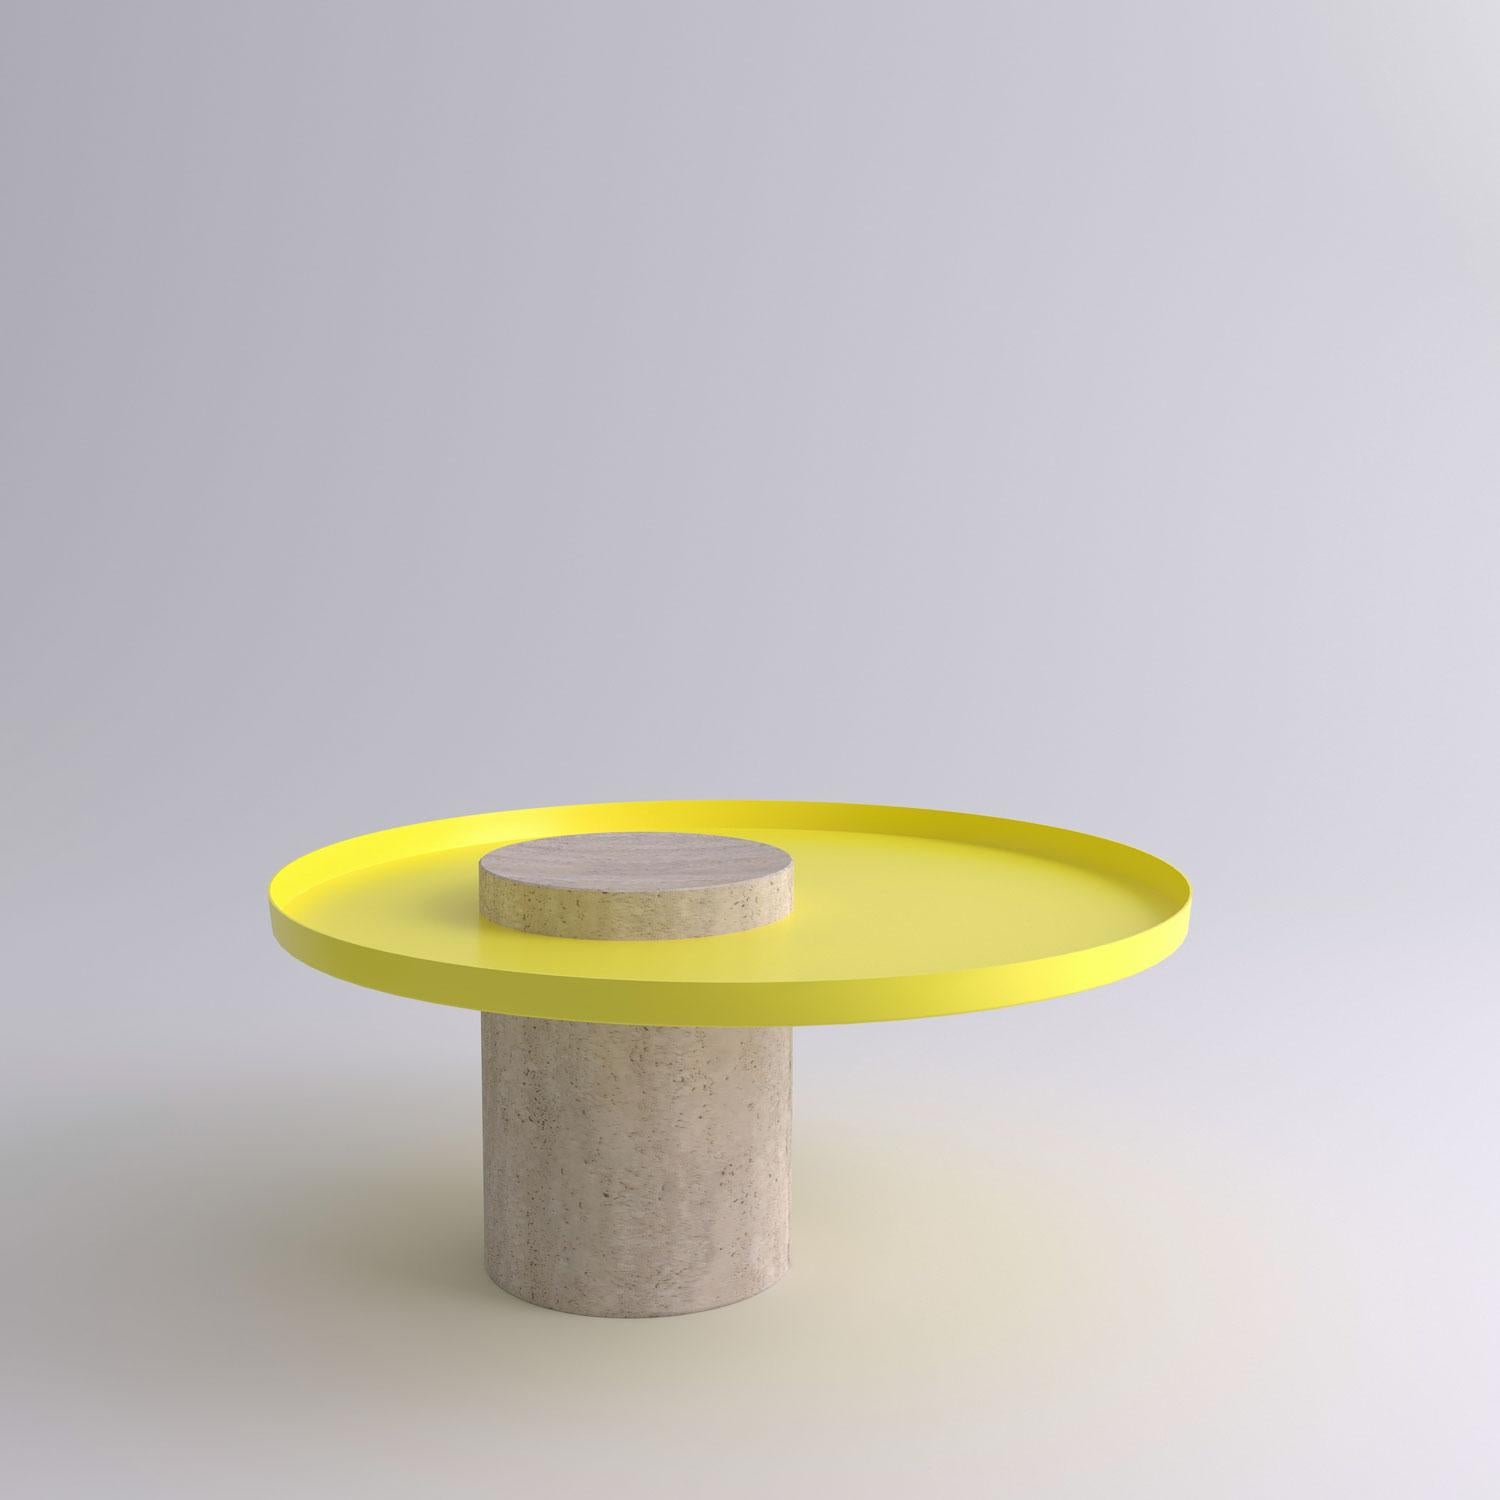 Low travertine contemporary guéridon, Sebastian Herkner
Dimensions: D 70 x H 33 cm
Materials: Travertine stone, yellow metal tray

The salute table exists in 3 sizes, 4 different marble stones for the column and 5 different finishes for the tray